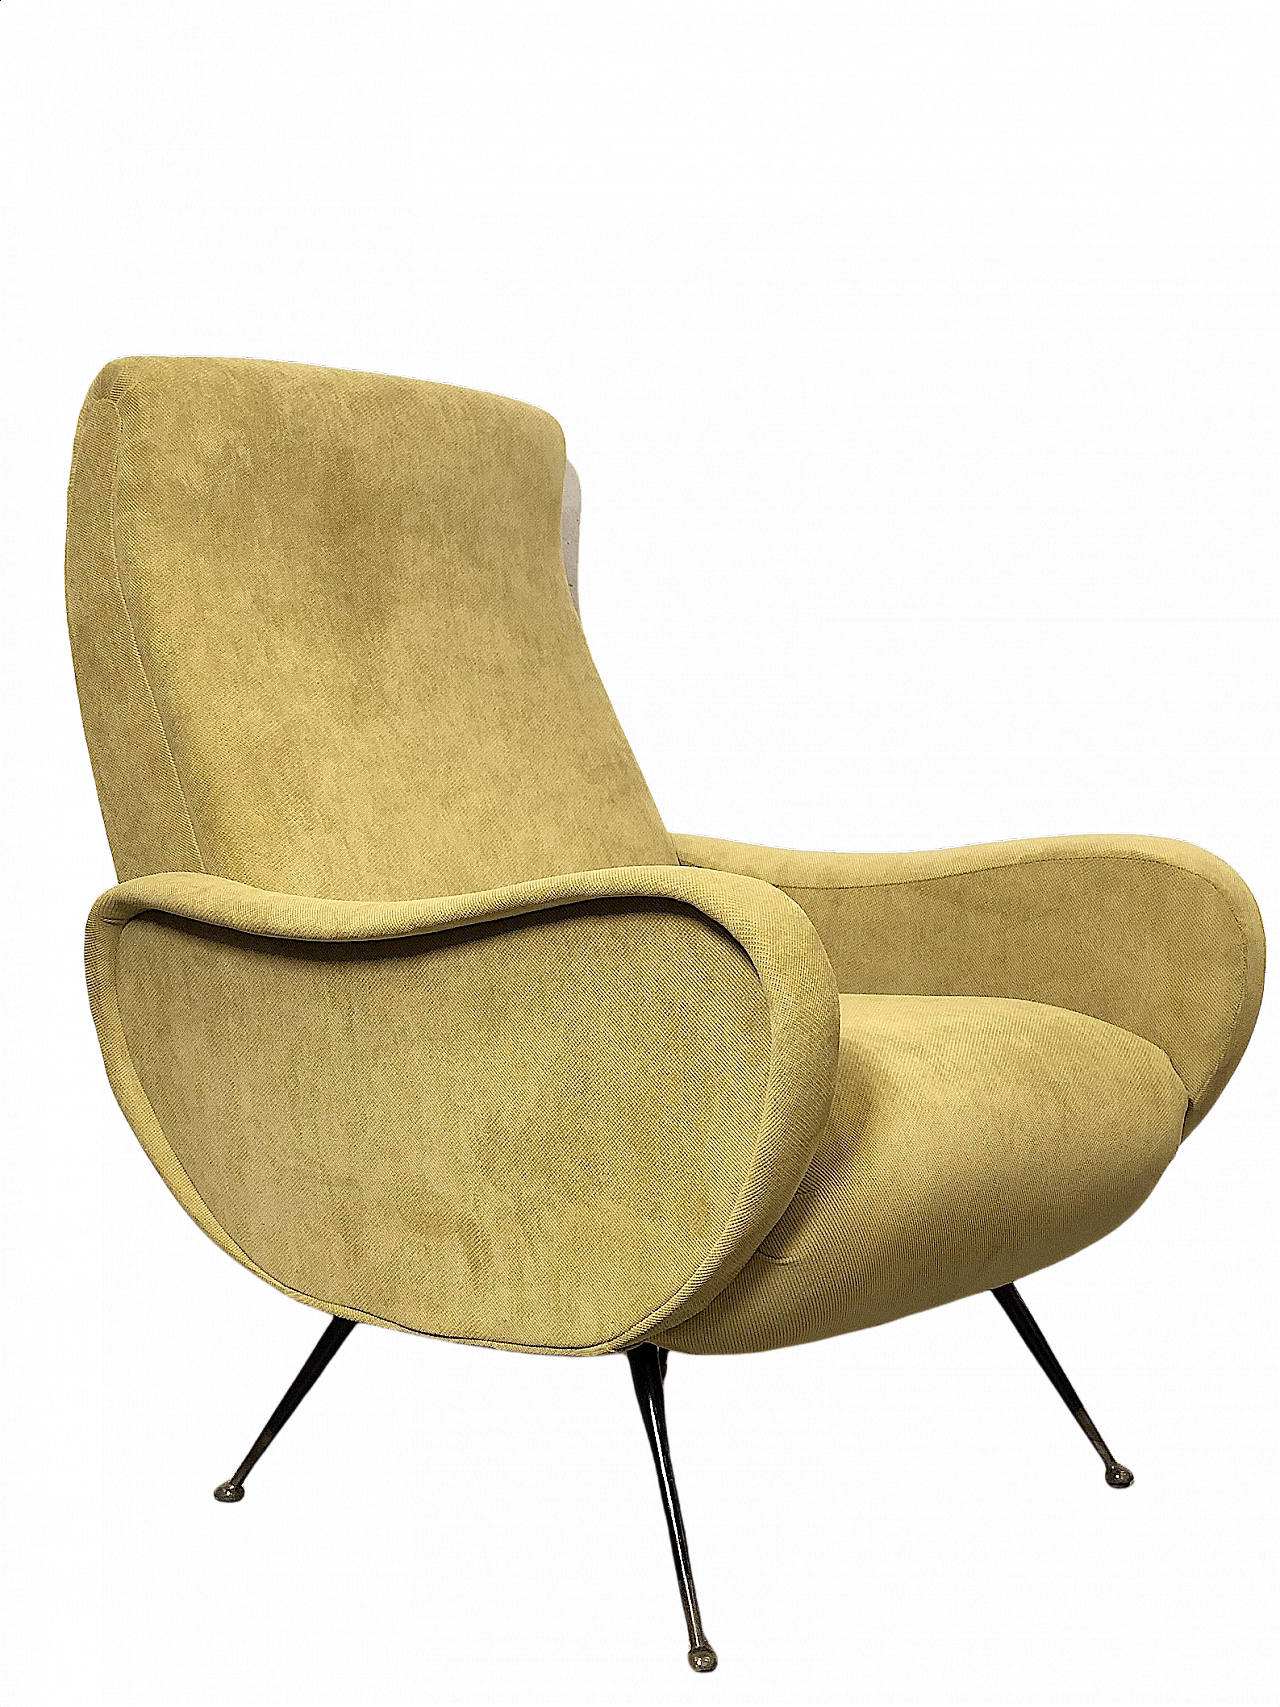 Yellow armchair in the style of Lady by Marco Zanuso, 1950s 1362557